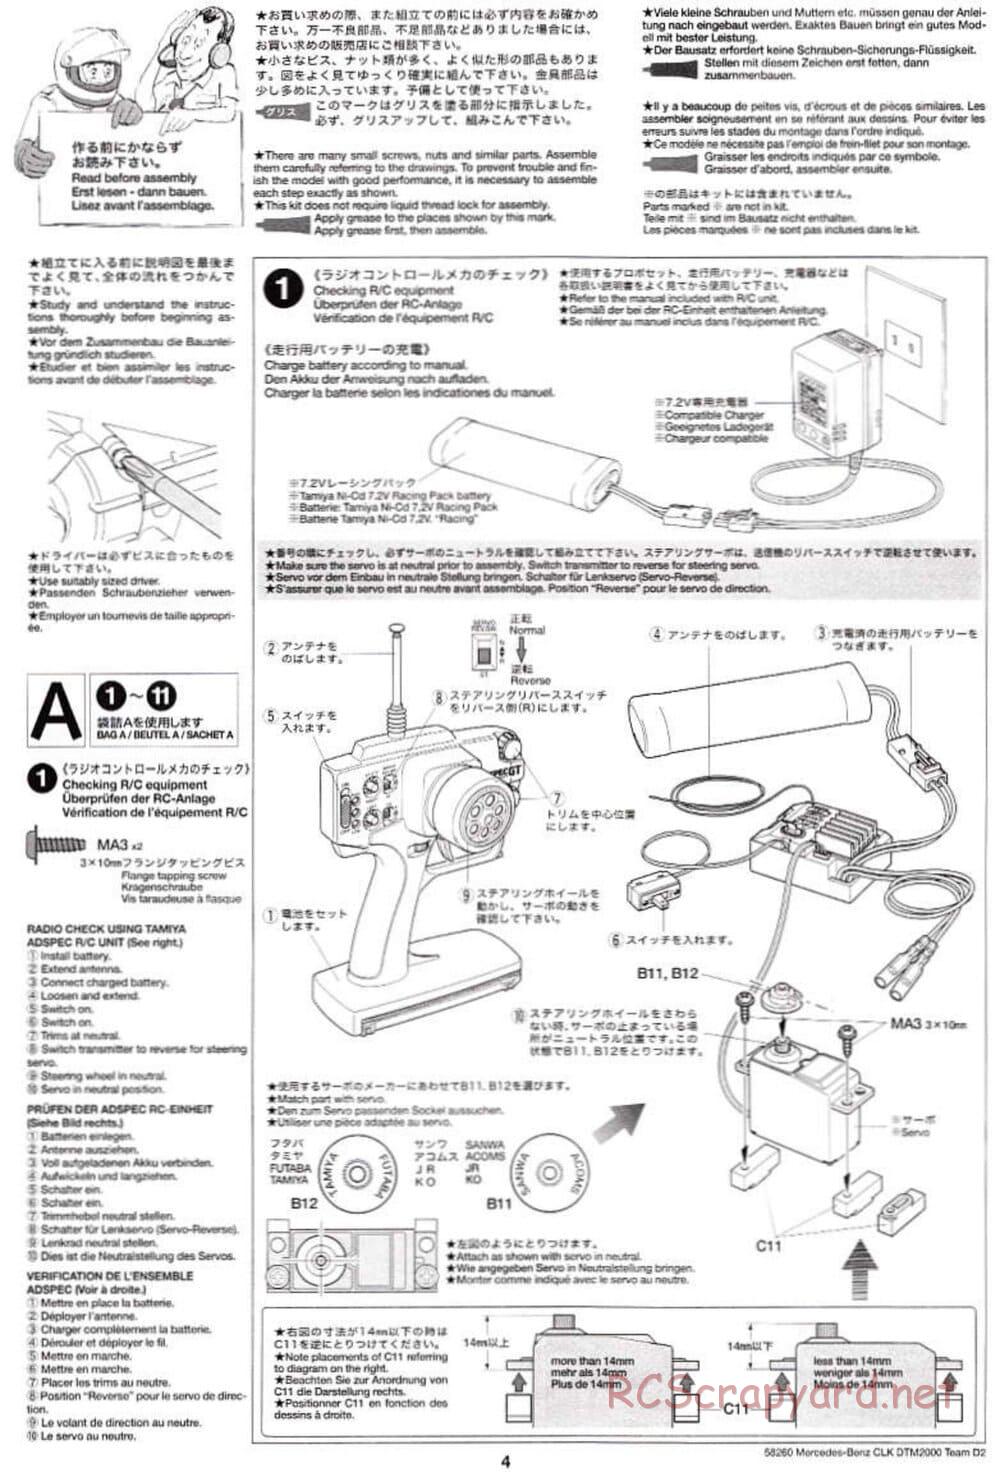 Tamiya - Mercedes Benz CLK DTM 2000 Team D2 - TL-01 Chassis - Manual - Page 4